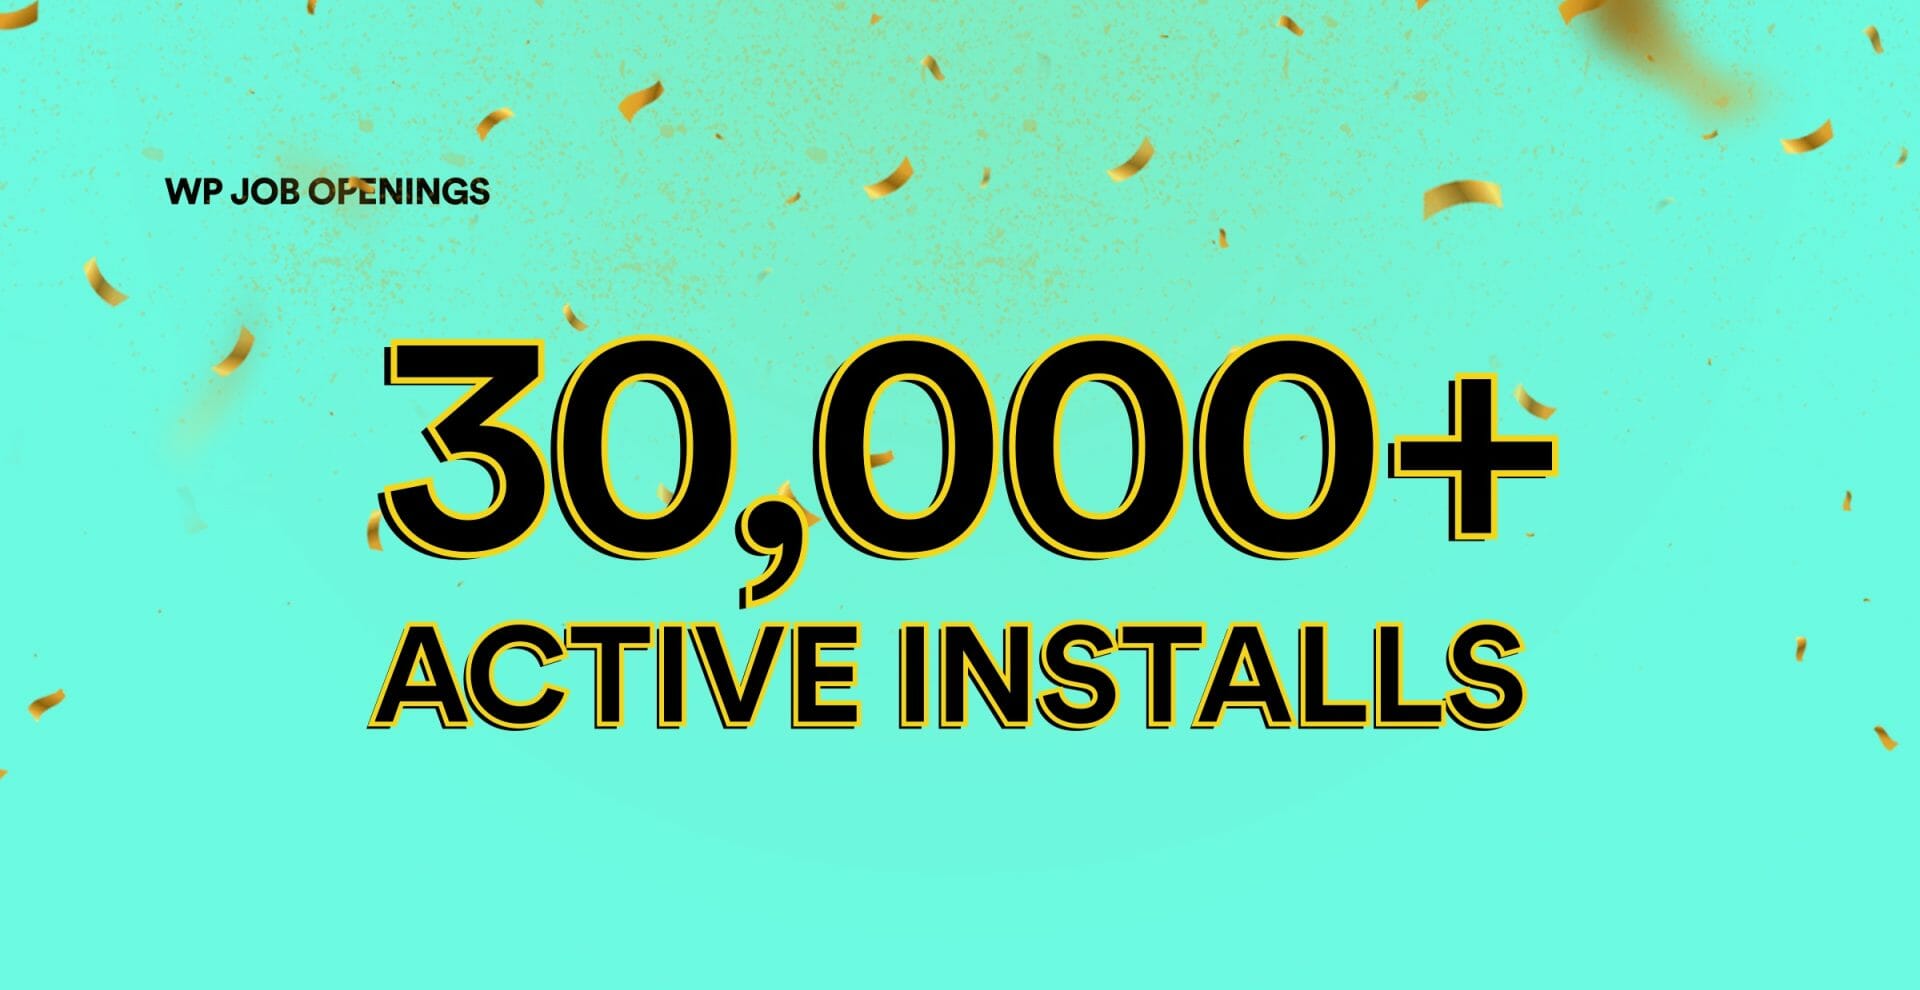 Achieving 30K Active Installations: A Walk Down the Memory Lane